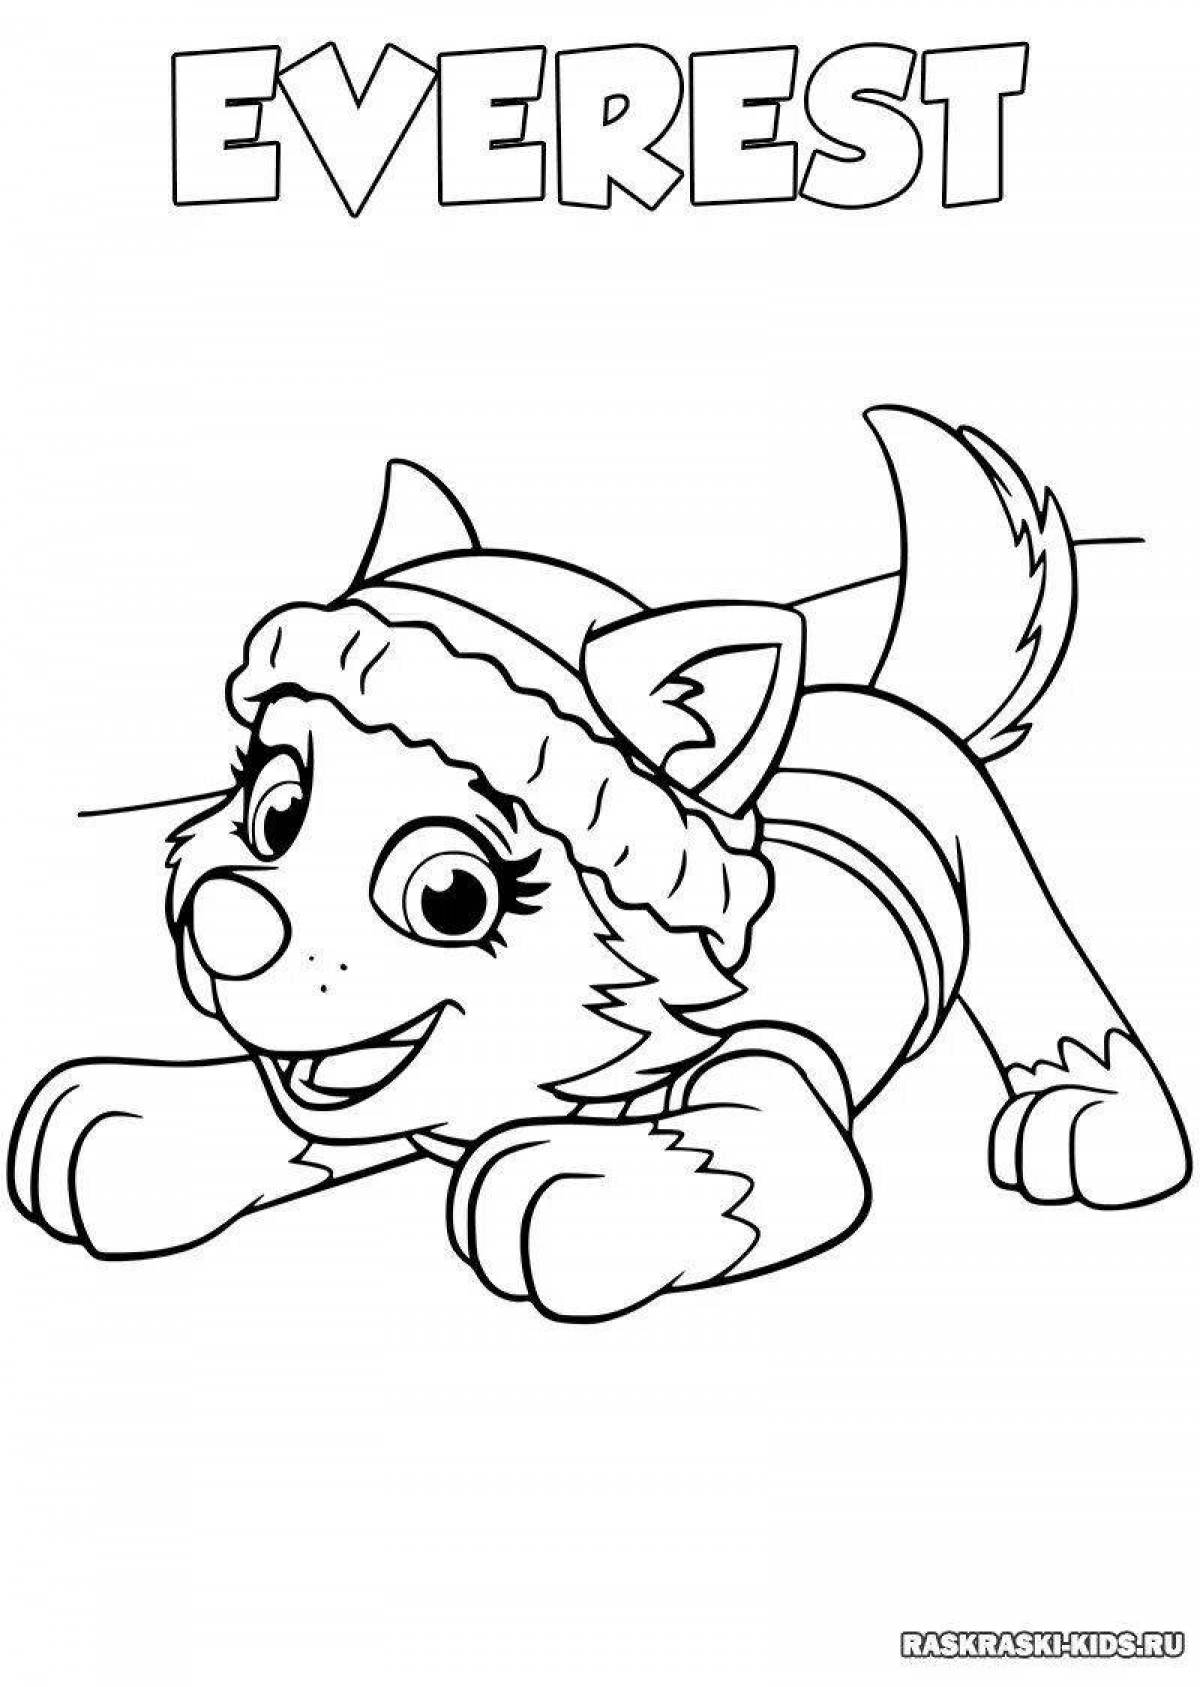 Adorable Everest puppy coloring book